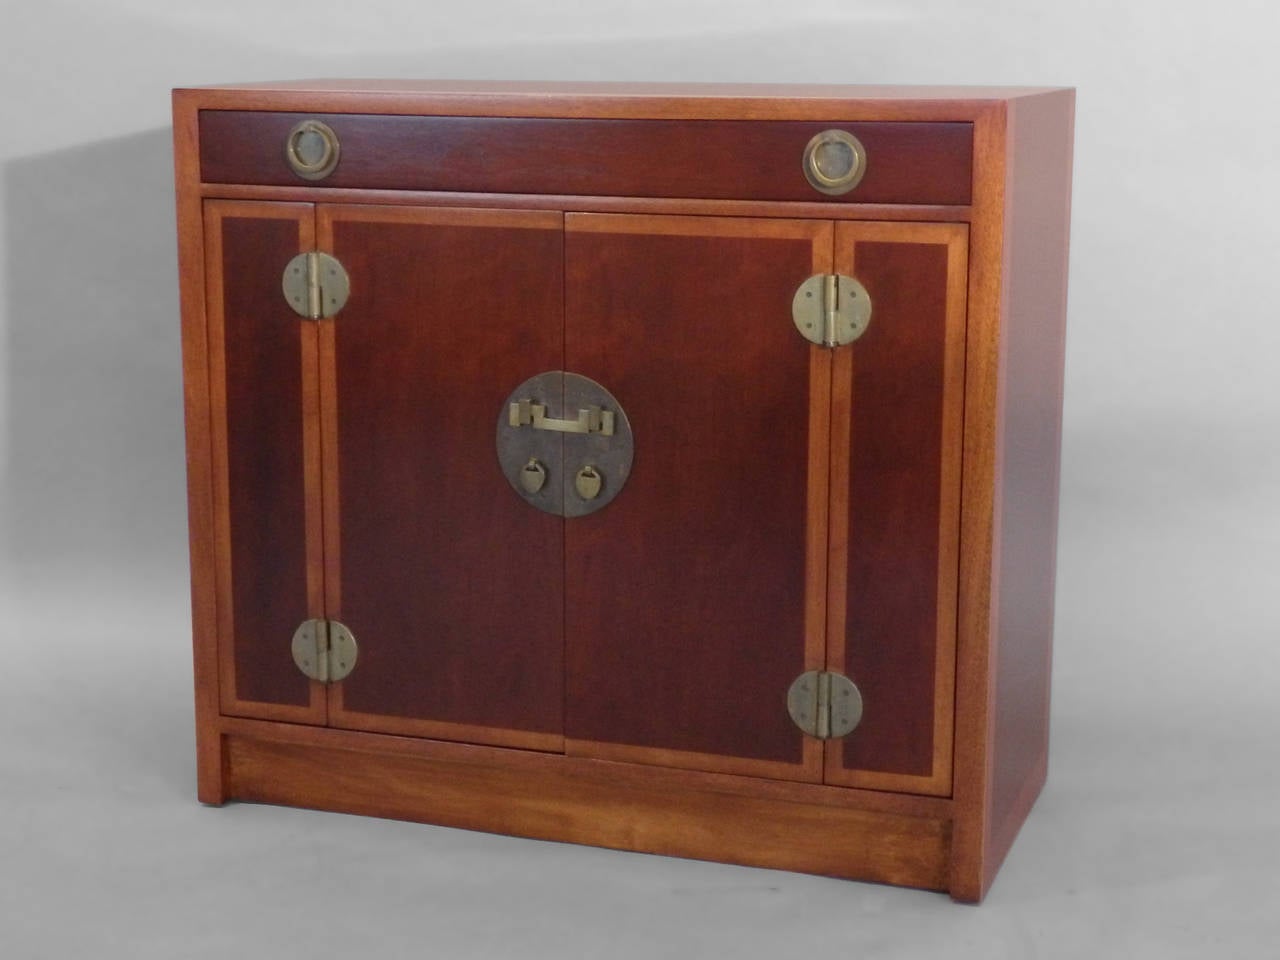 Asian inspired chest by Edward Wormley for Dunbar.